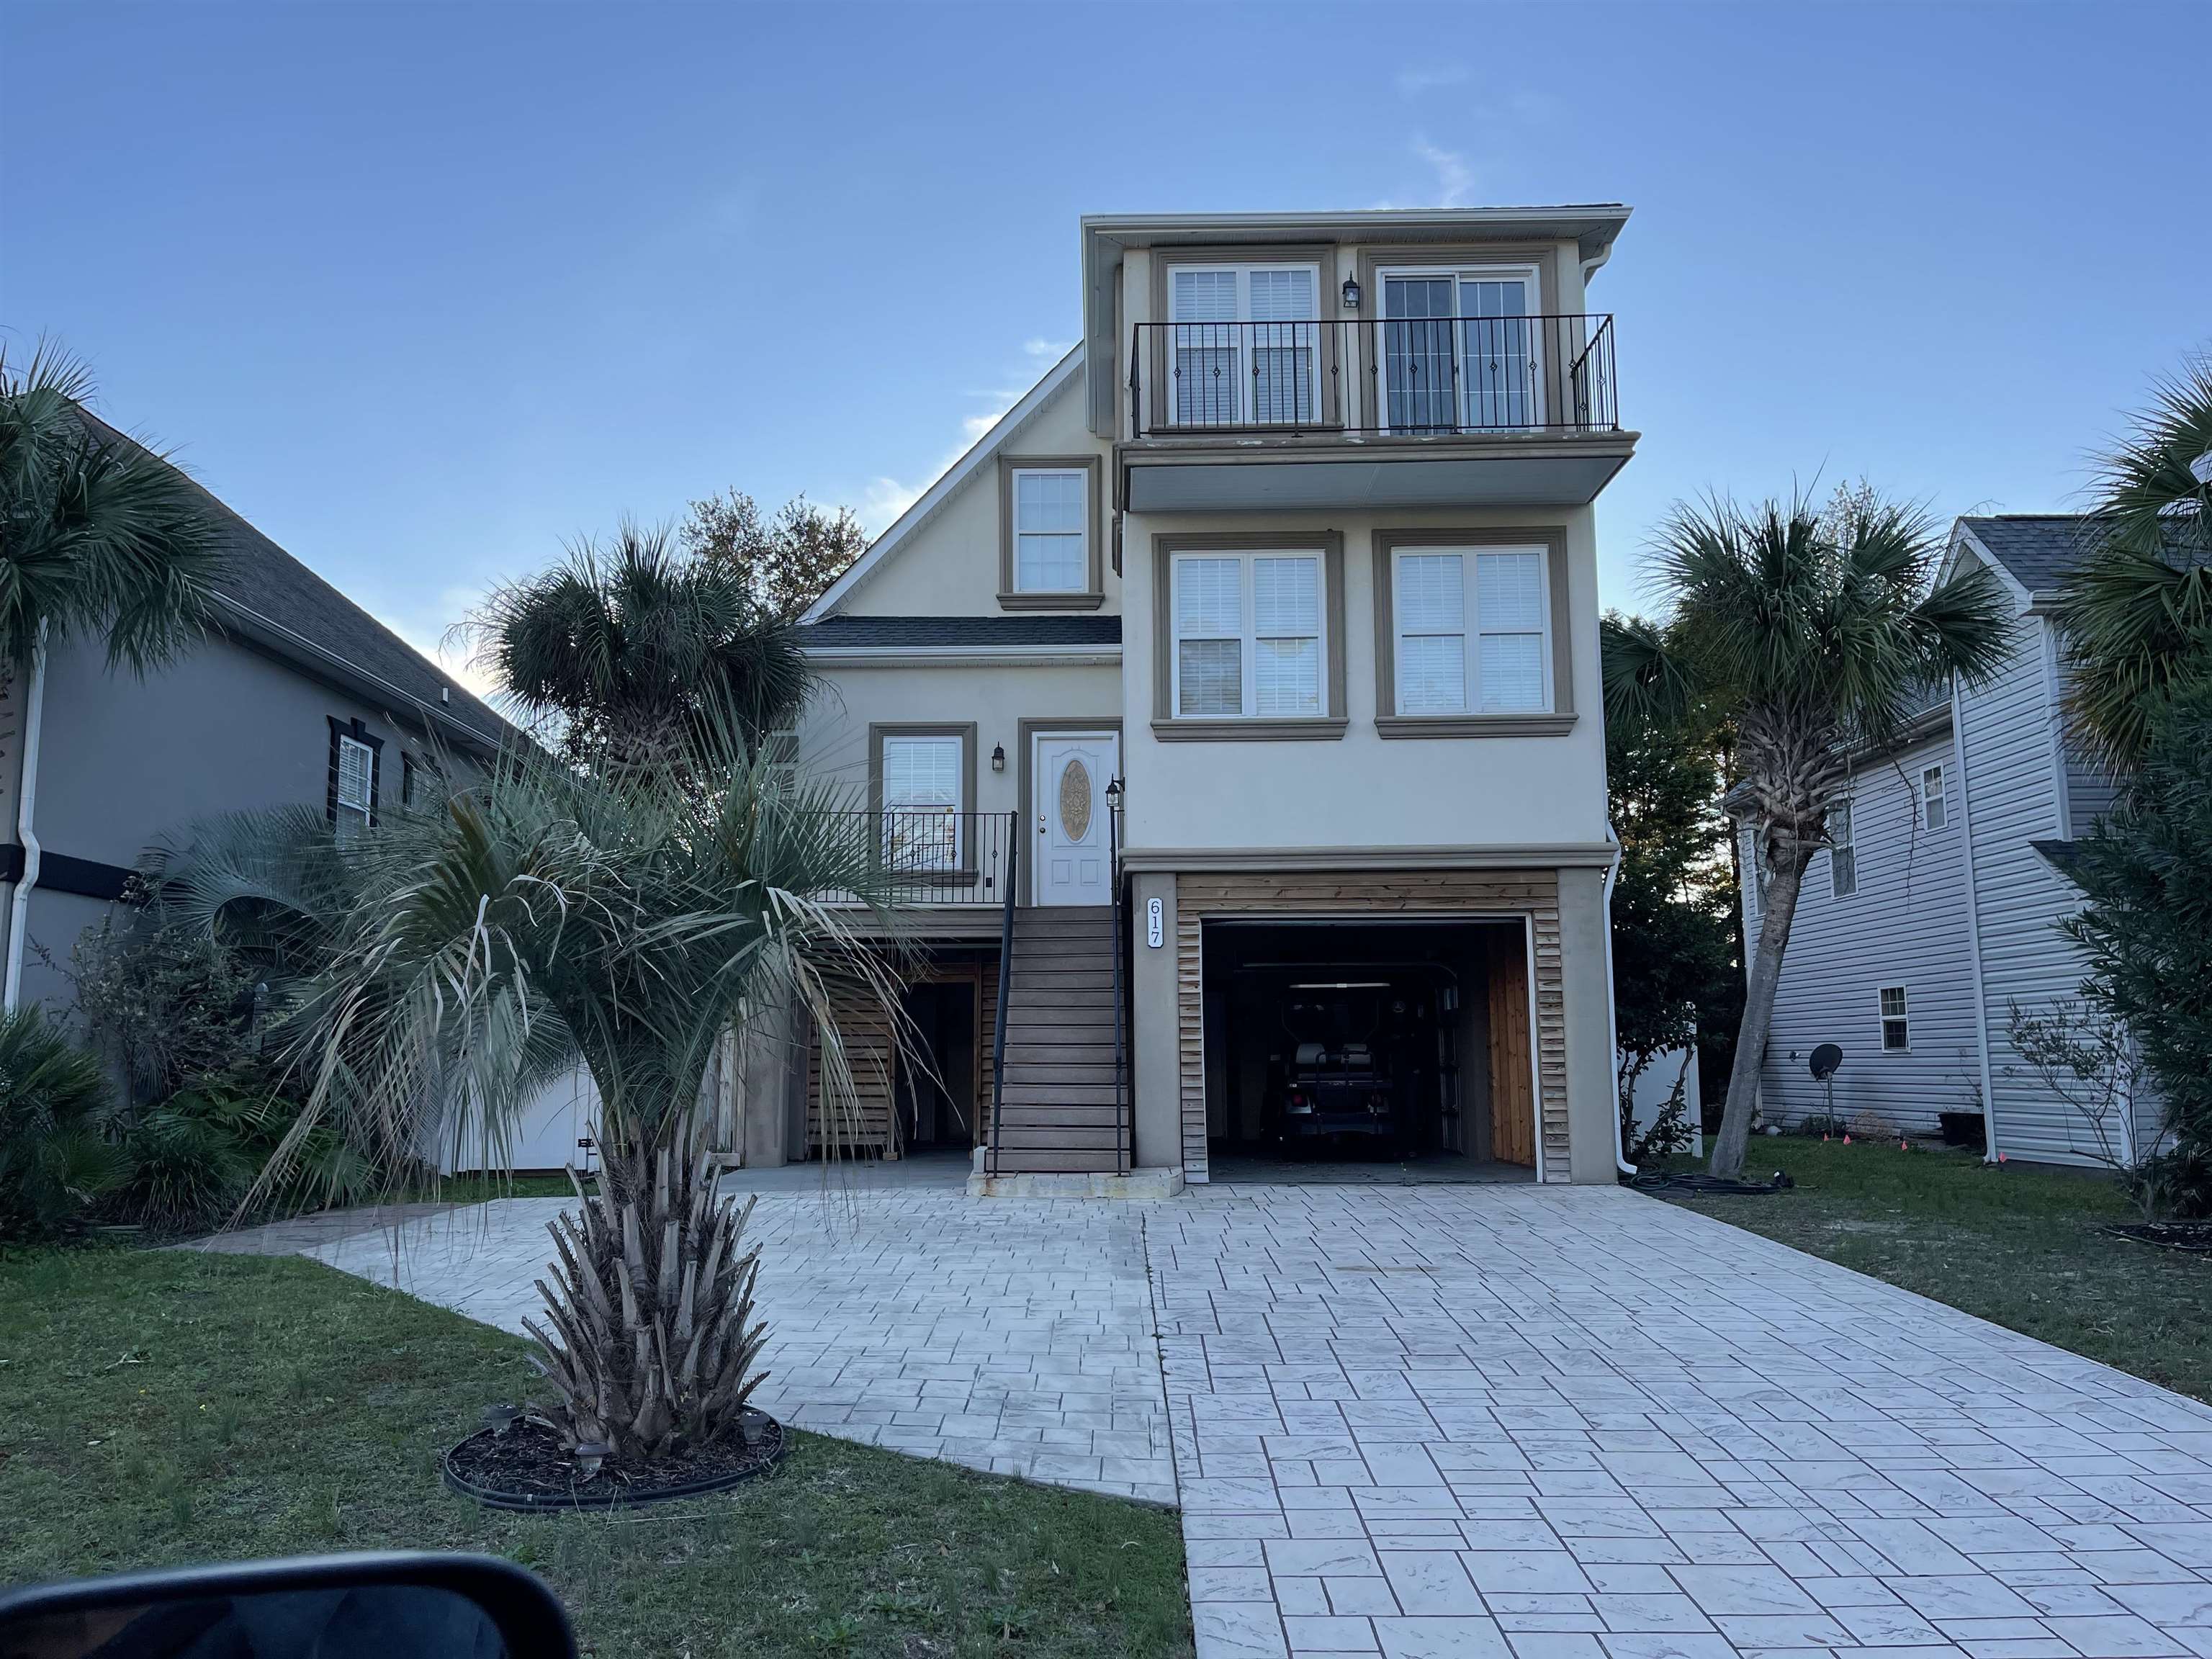 617 5th Ave. S North Myrtle Beach, SC 29582